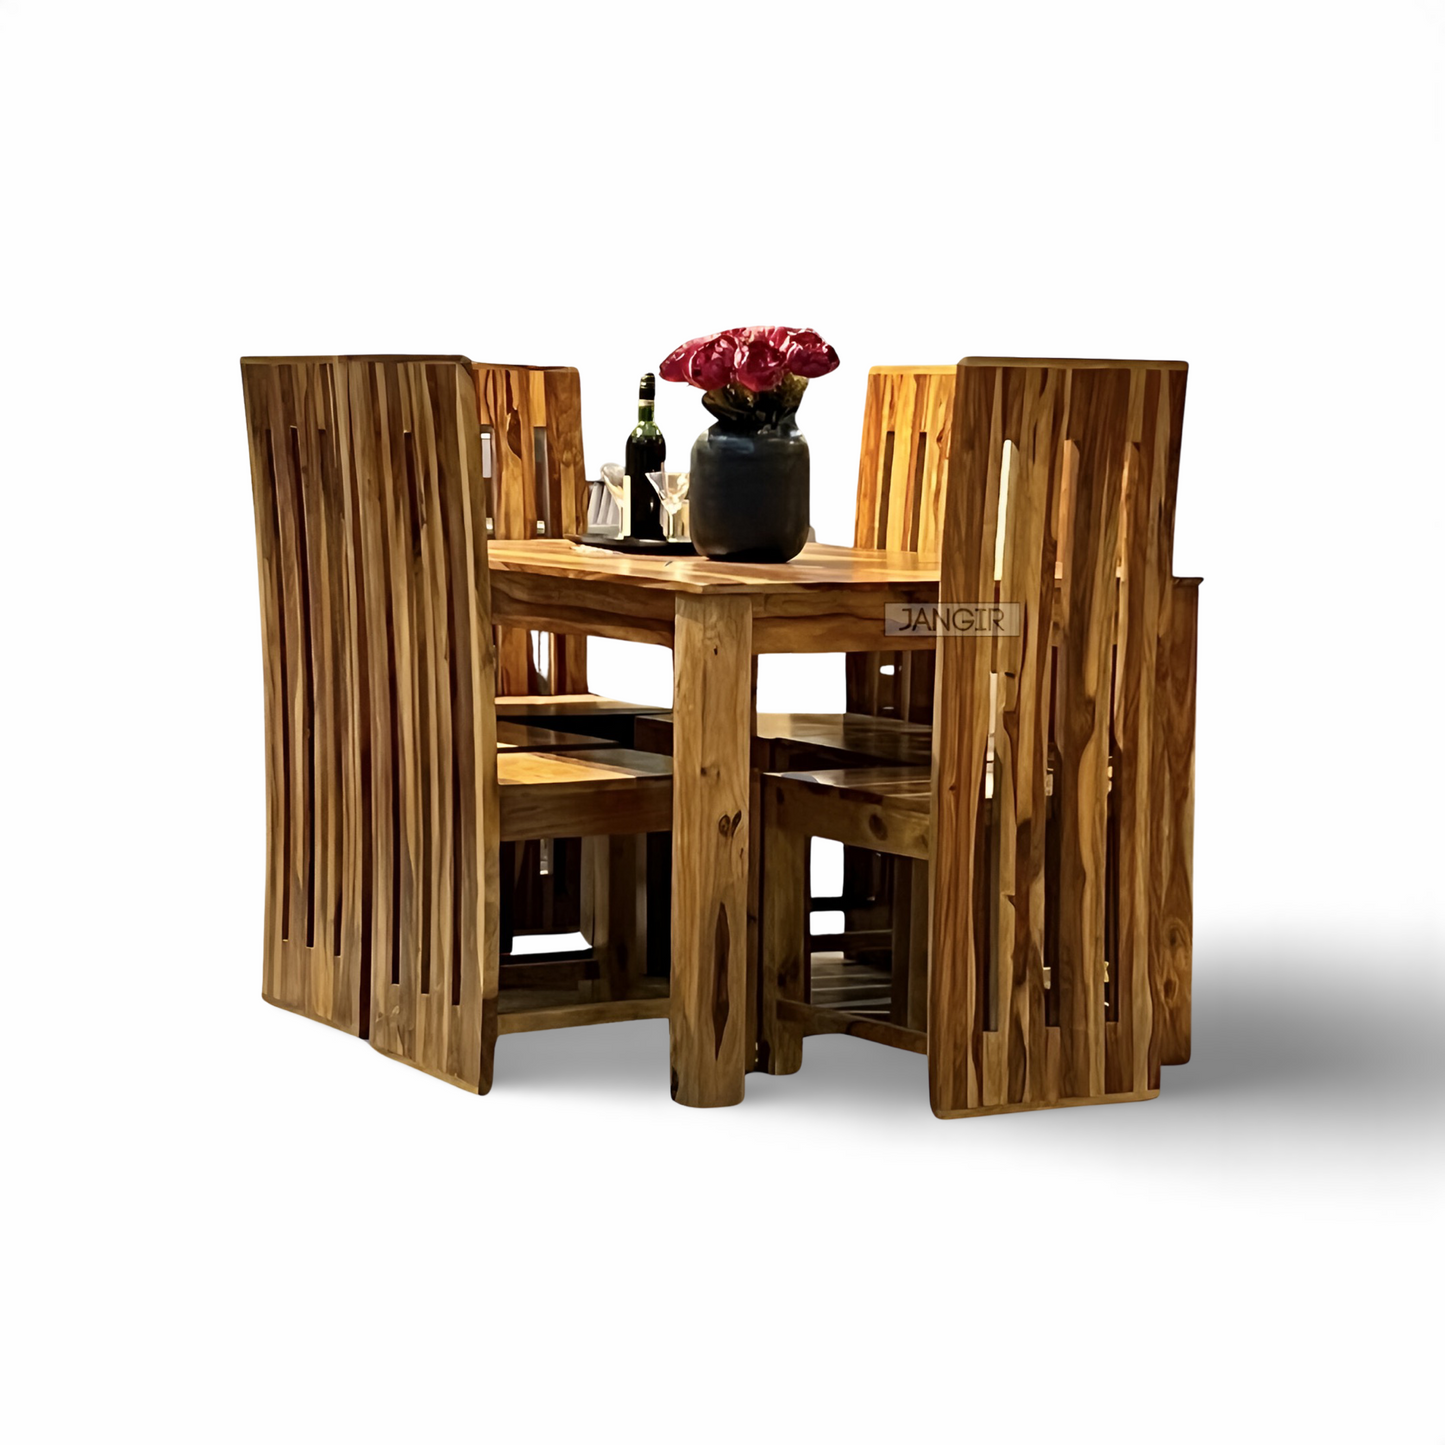 Transform your dining space with our Marine dining set, made with sheesham wood. Buy  modern six and four-seater dining table today for a stylish upgrade!